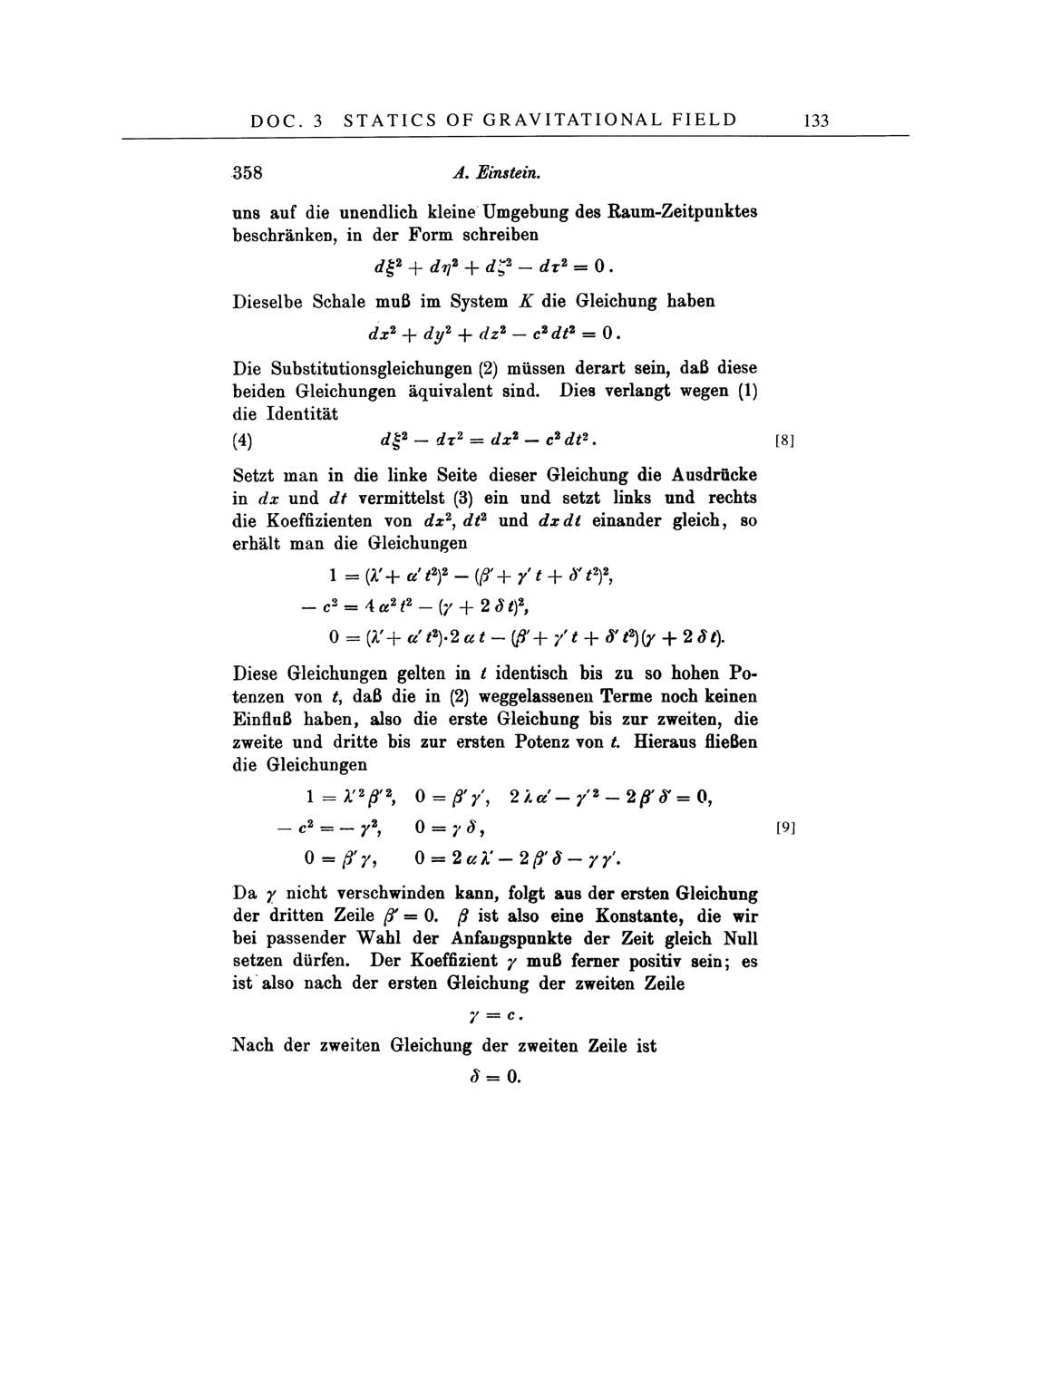 Volume 4: The Swiss Years: Writings 1912-1914 page 133